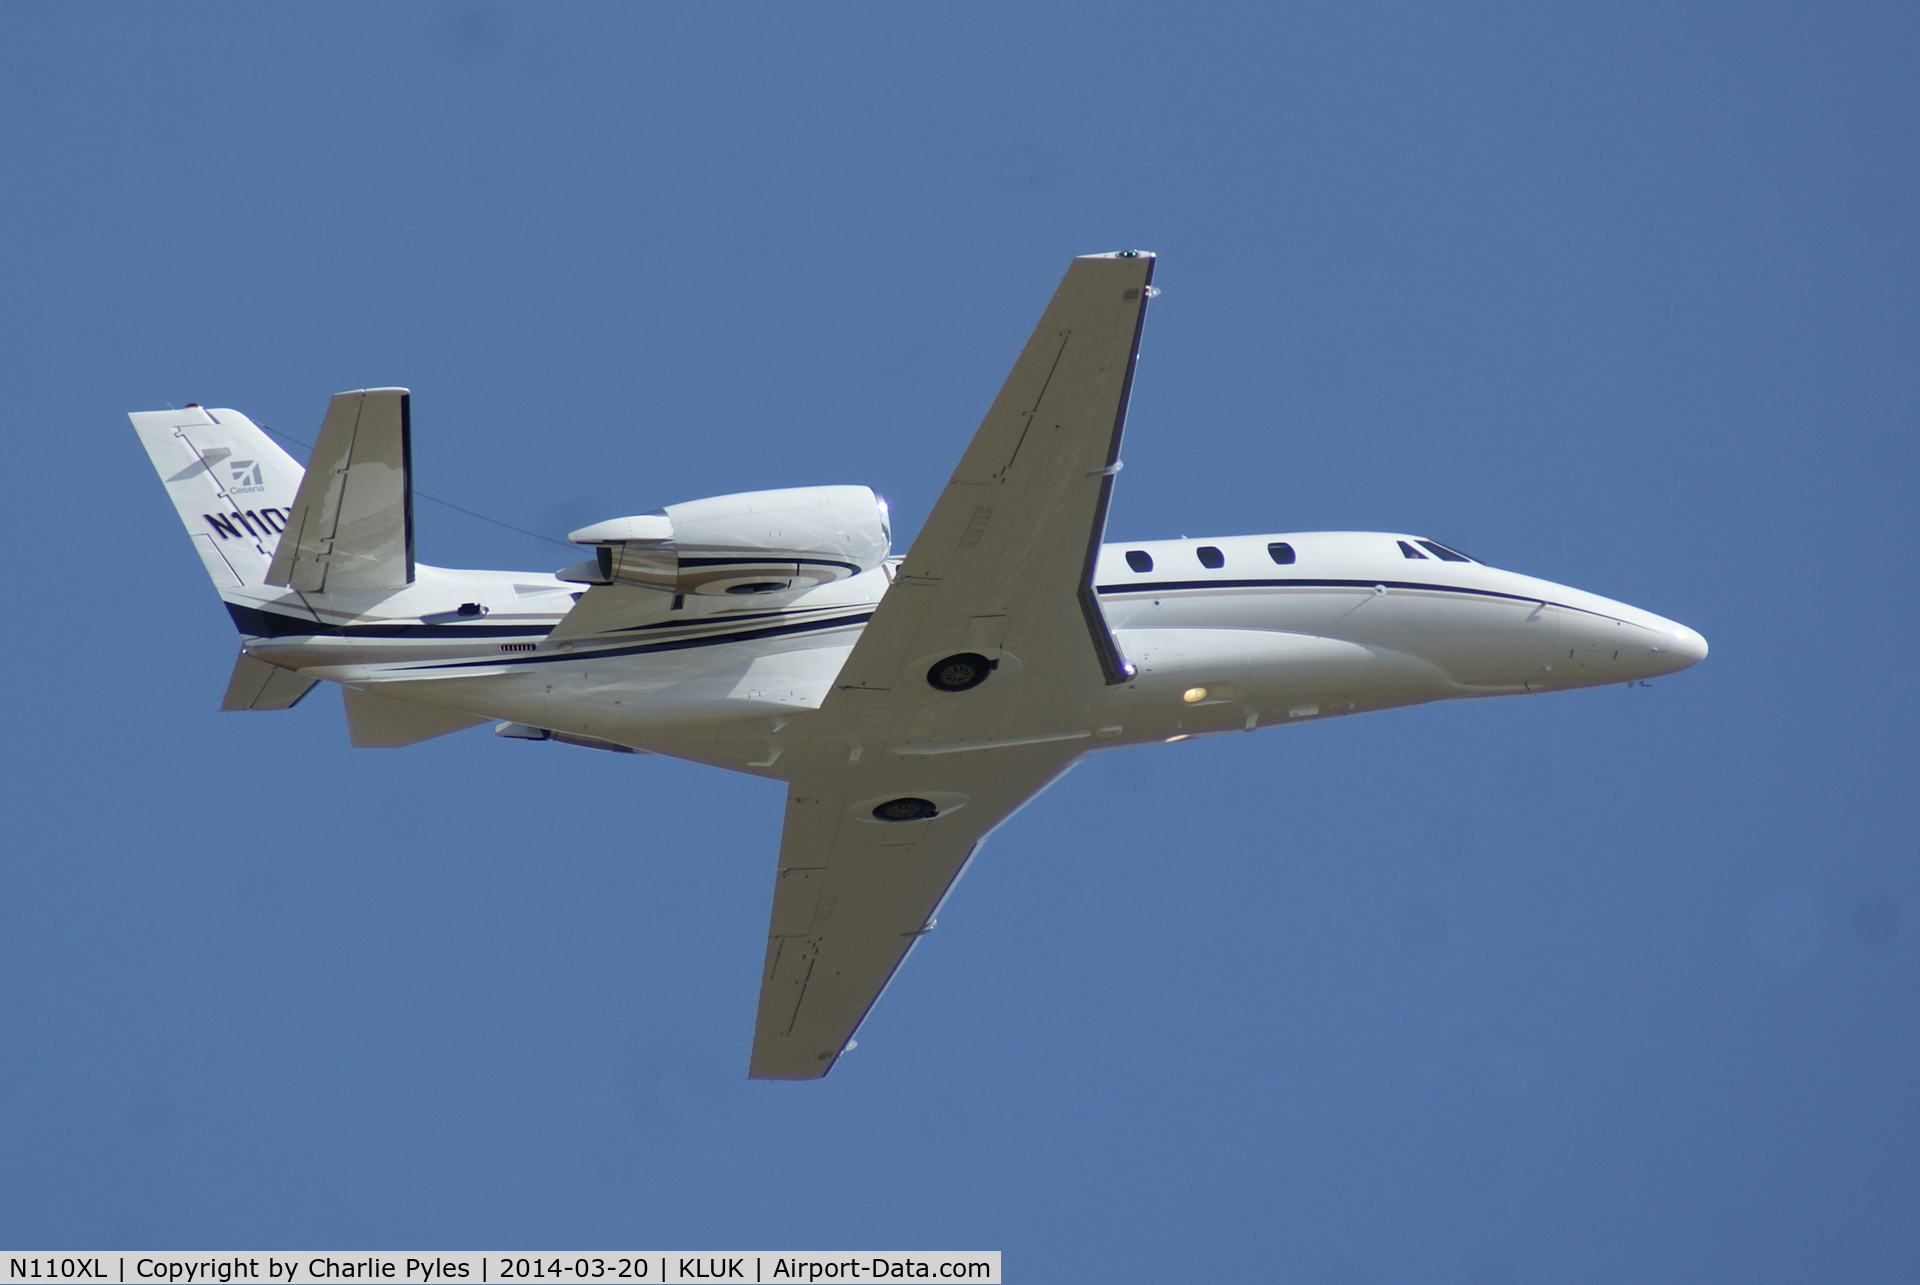 N110XL, 2012 Cessna 560XL Citation Excel C/N 560-6110, Added to a-d database for first time